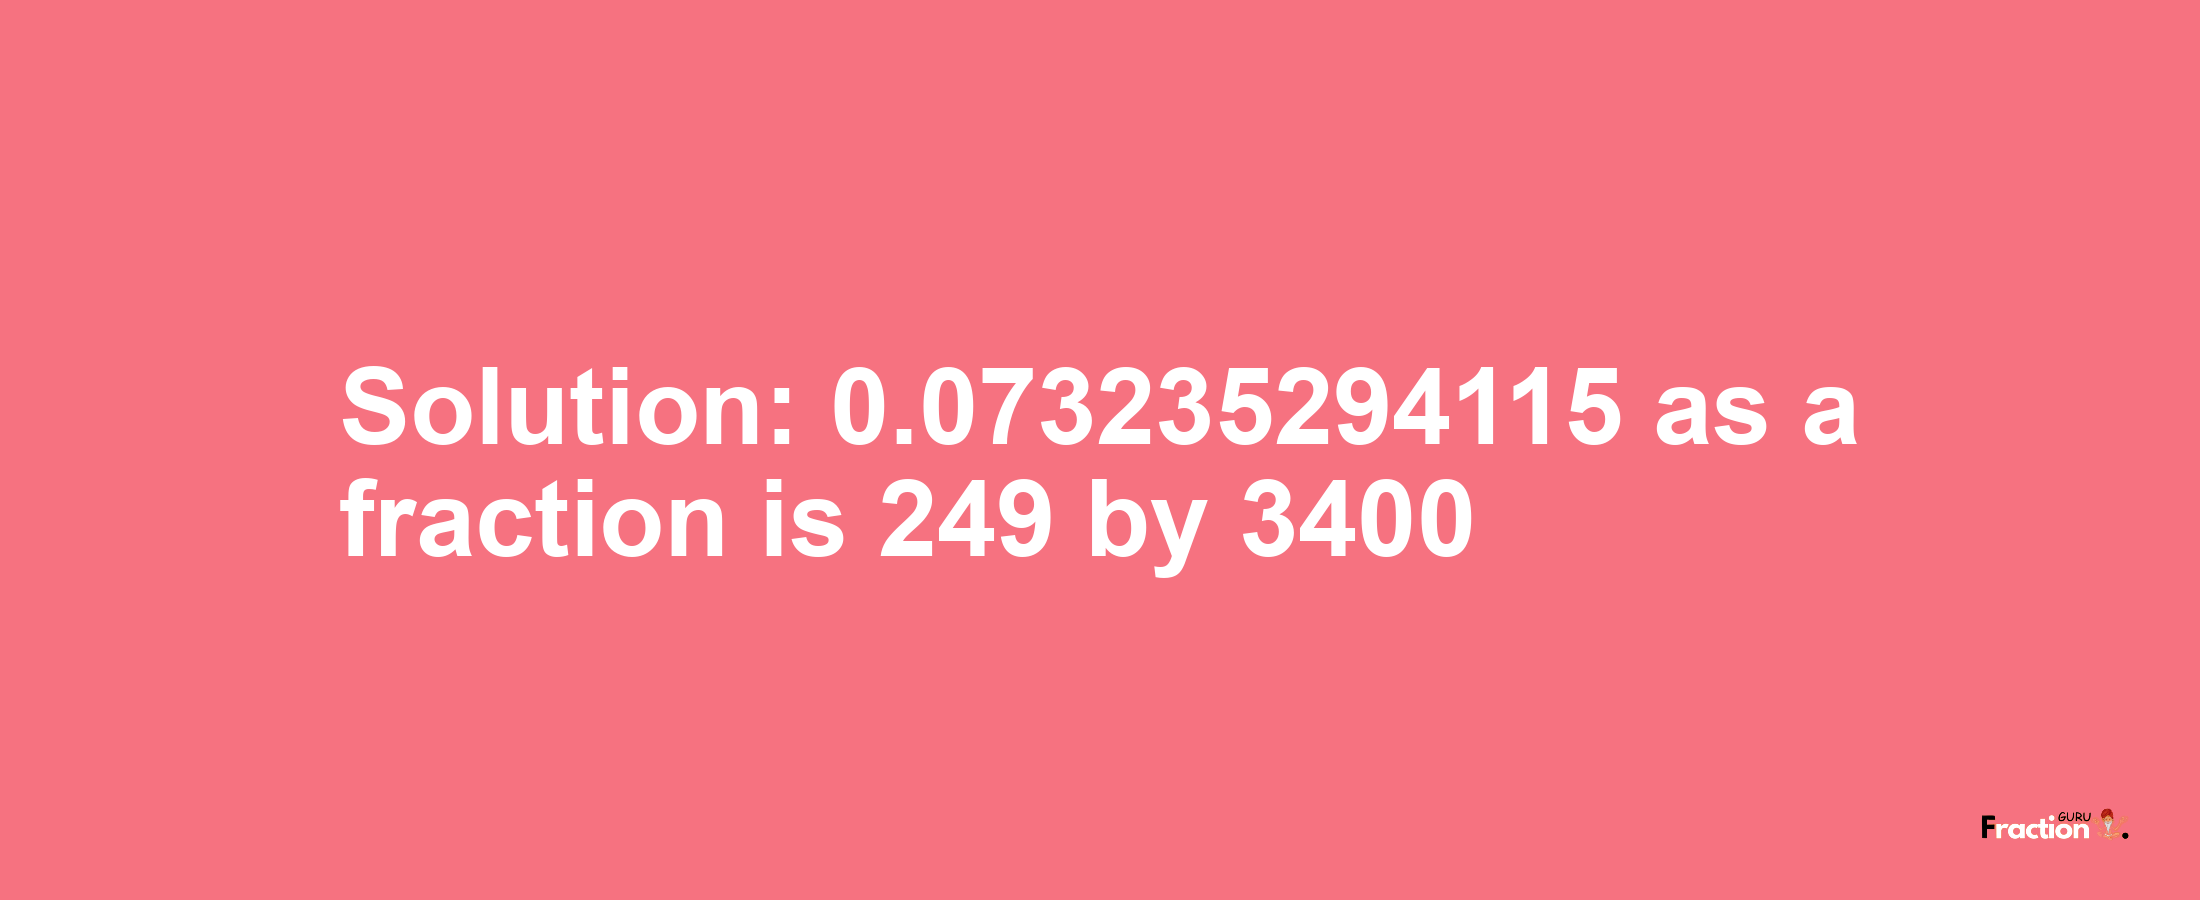 Solution:0.073235294115 as a fraction is 249/3400